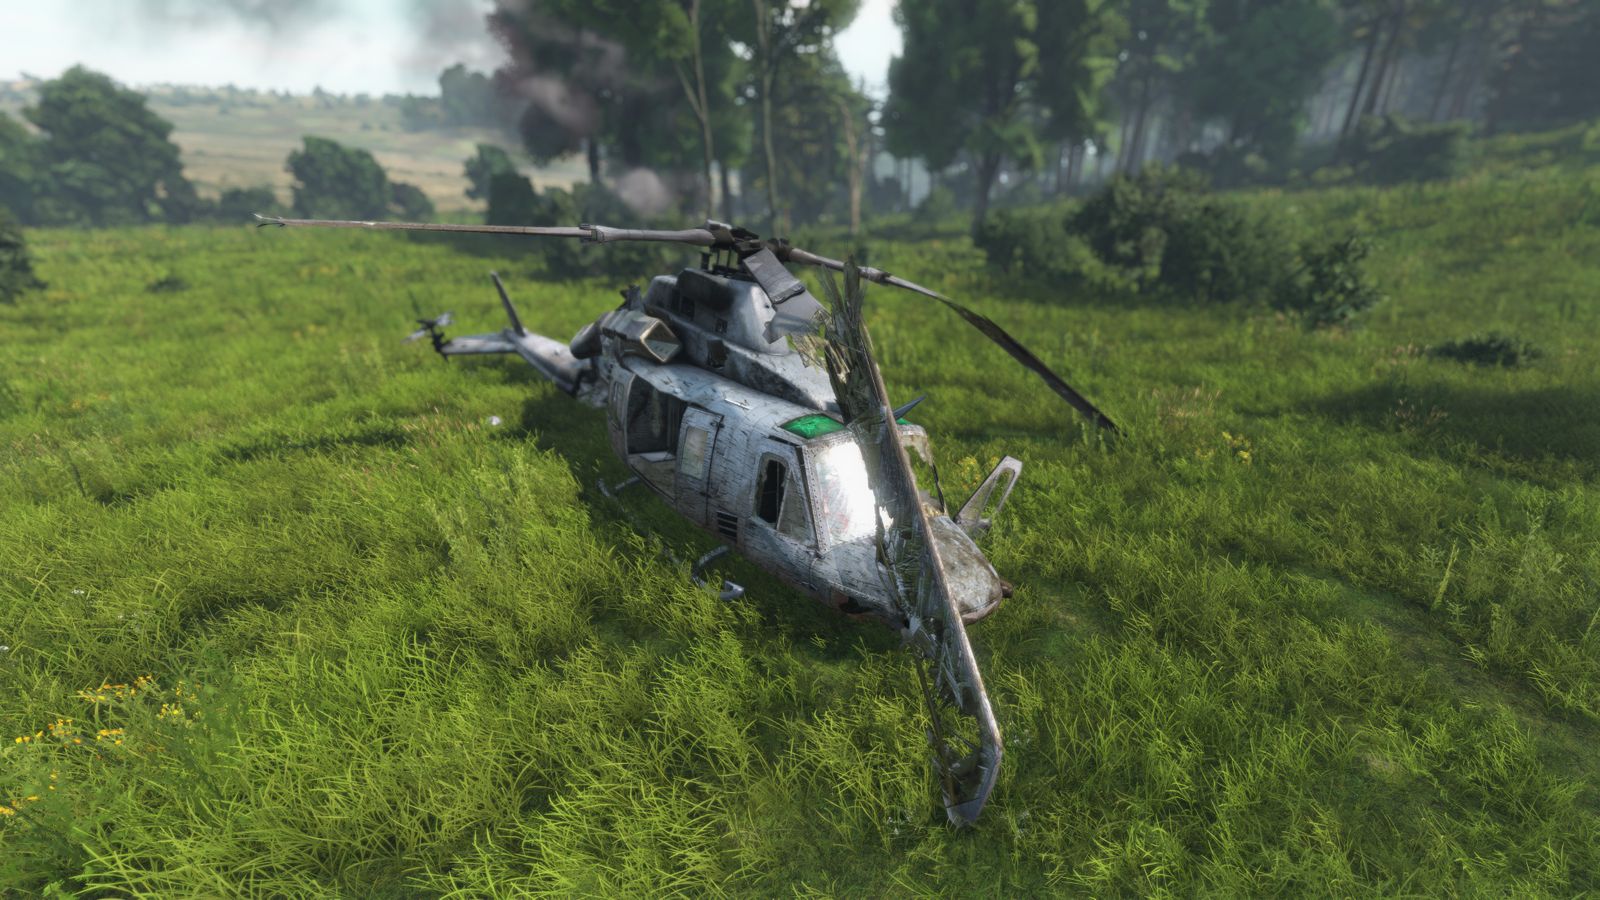 dayz standalone helicopter crash sites